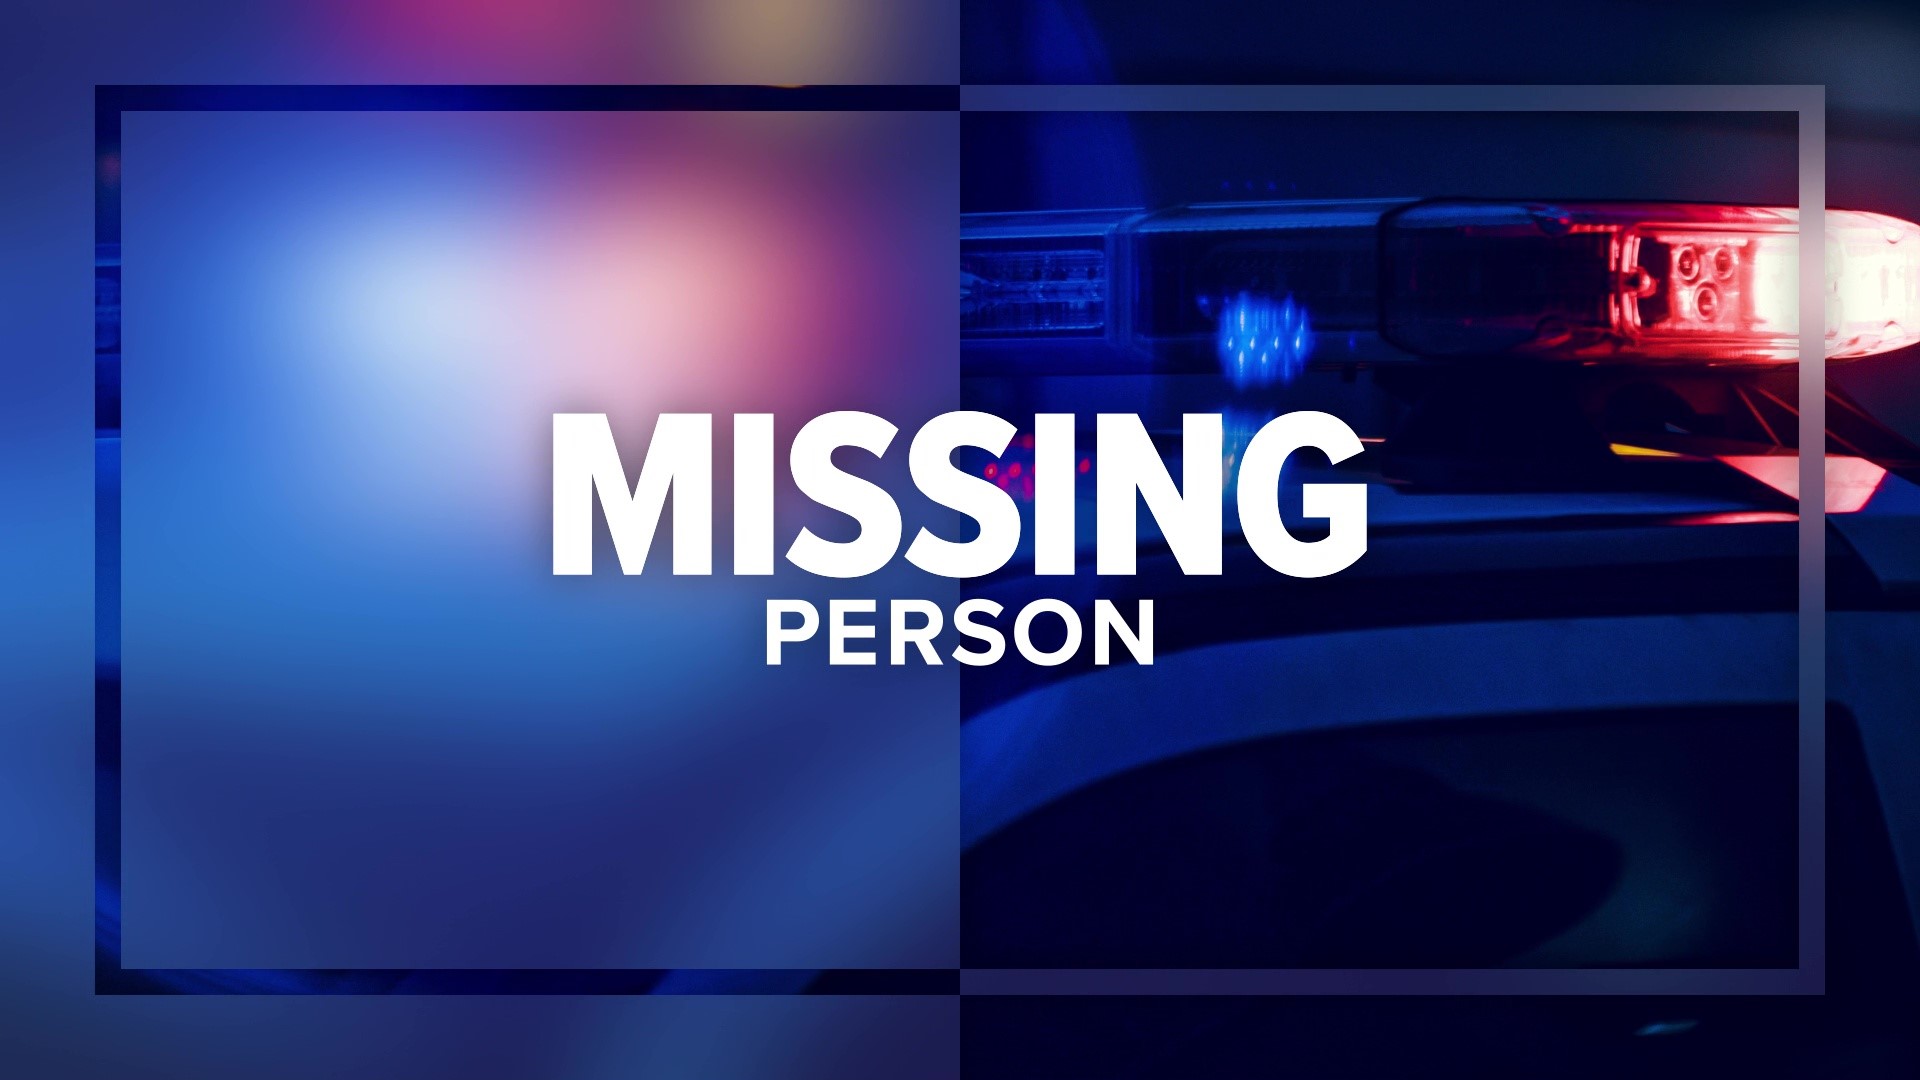 Franklin Piercy of Berlin Township, near Honesdale, was reported missing last Monday.